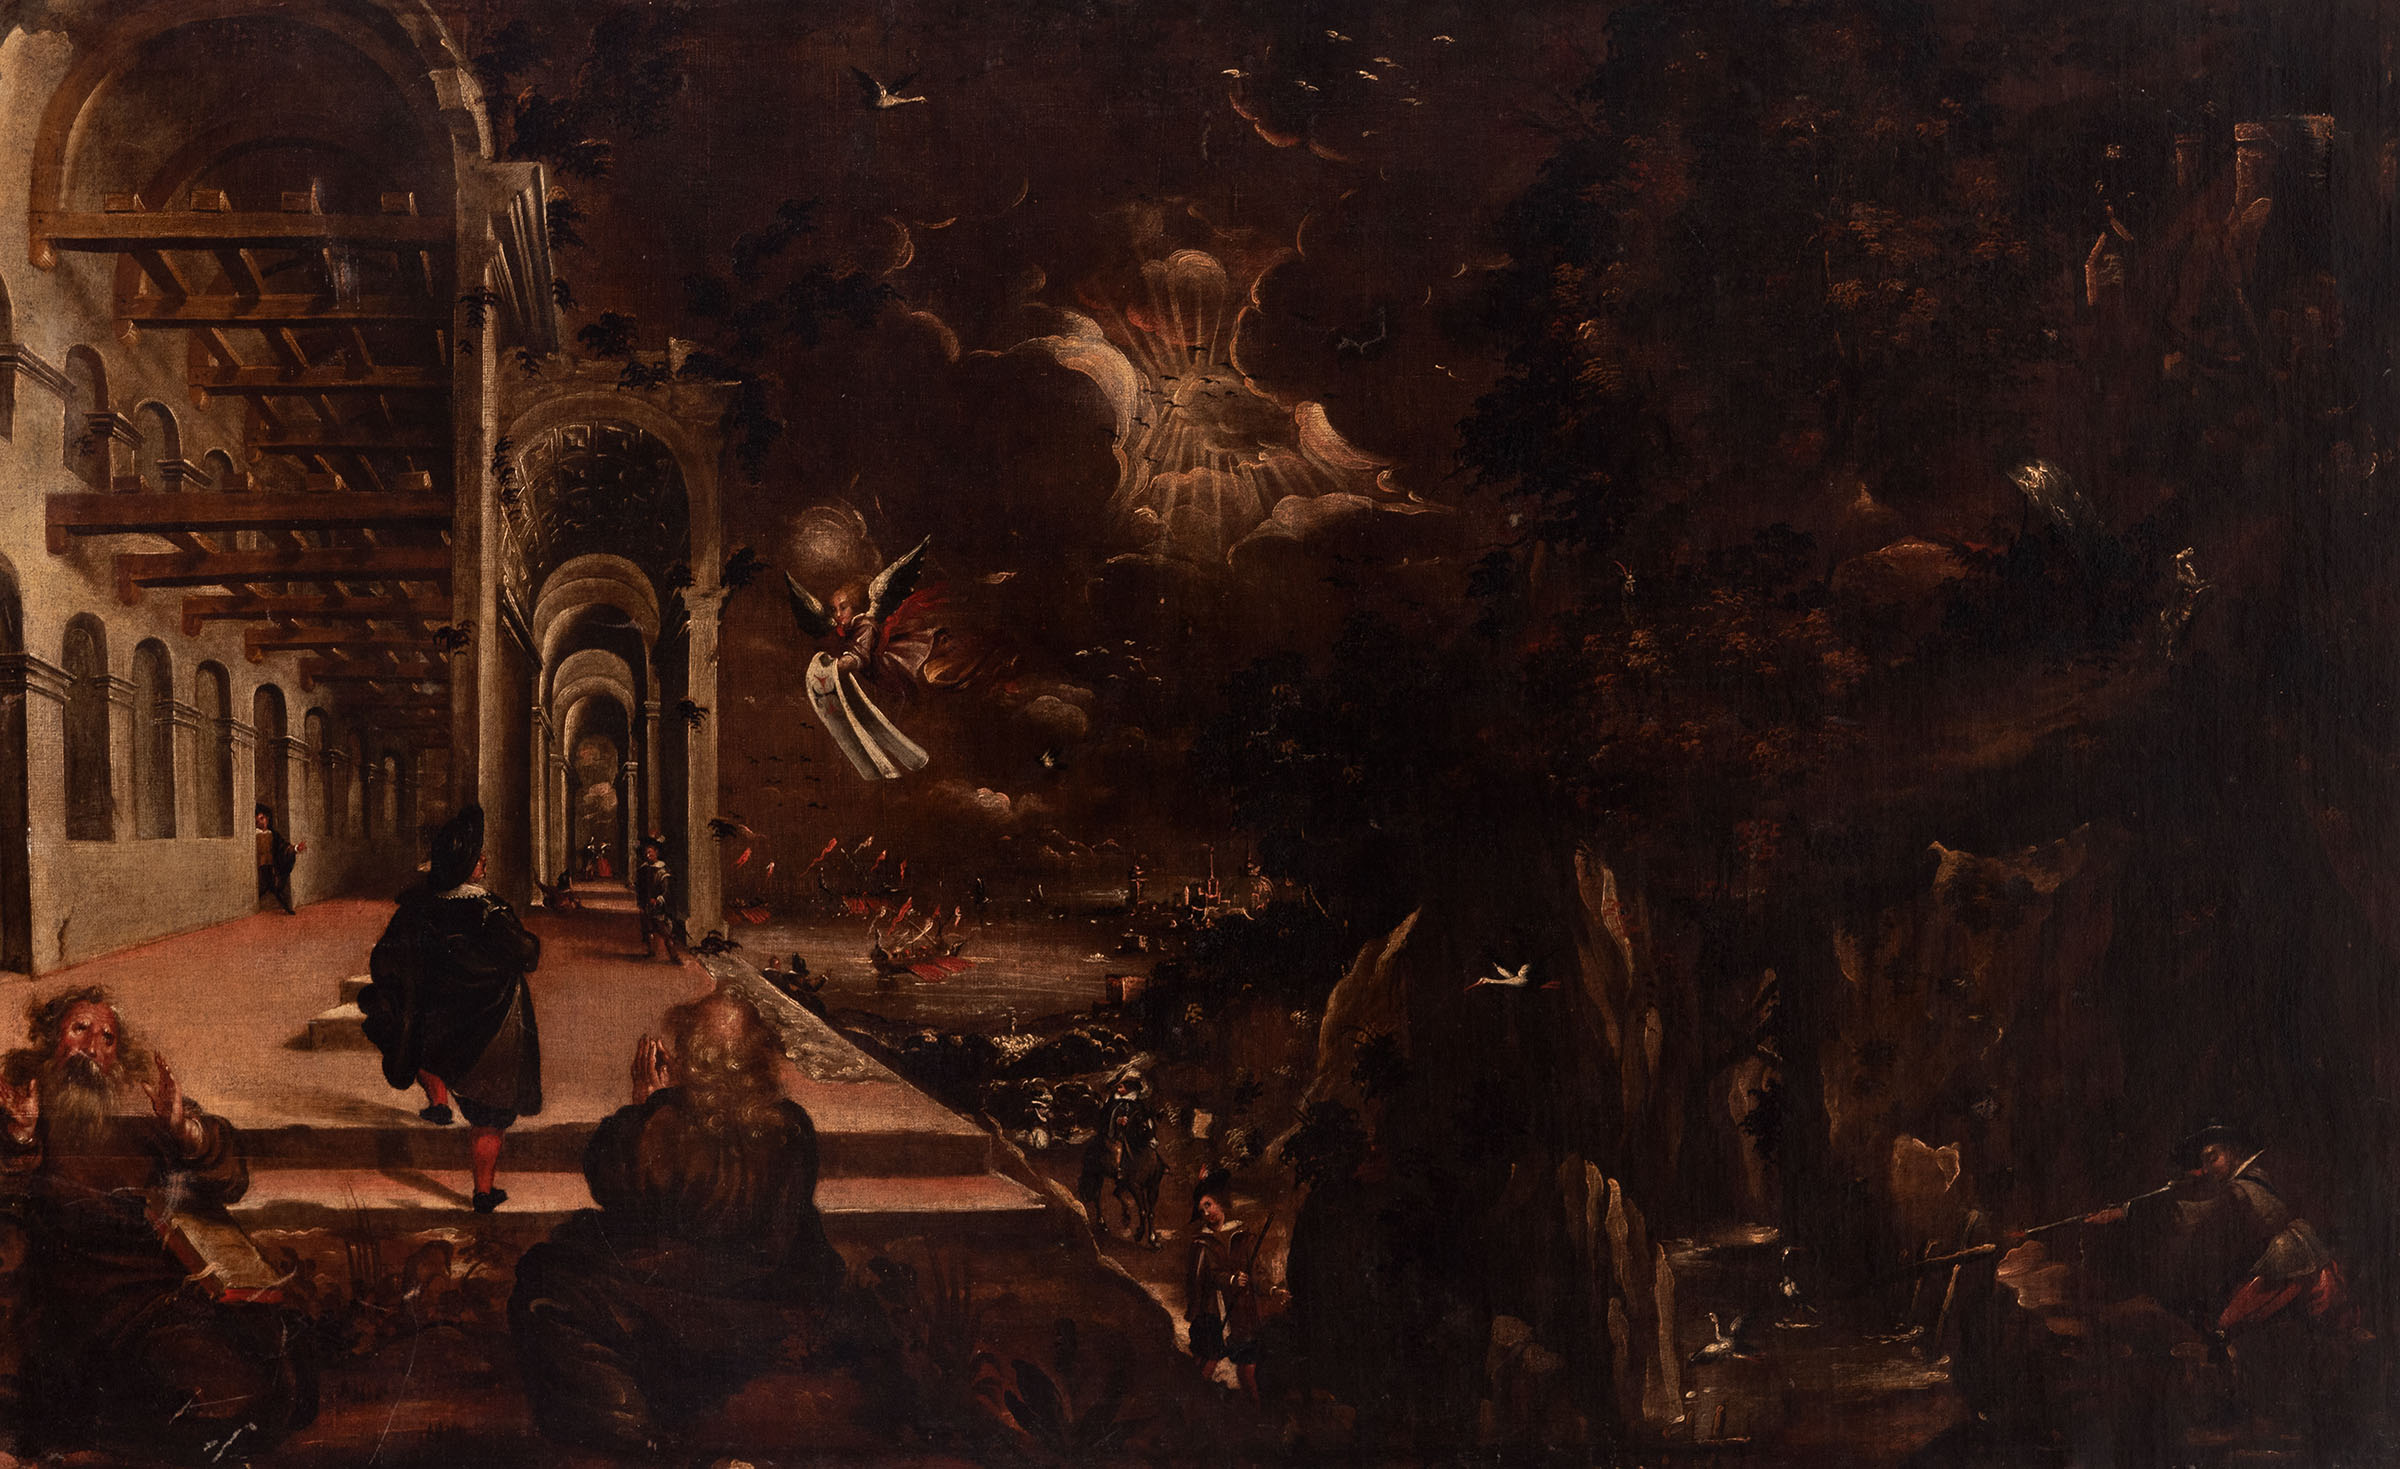 Dutch school; 17th century. "Apocalypse." Oil on canvas. Relined. It has slight repainting and has